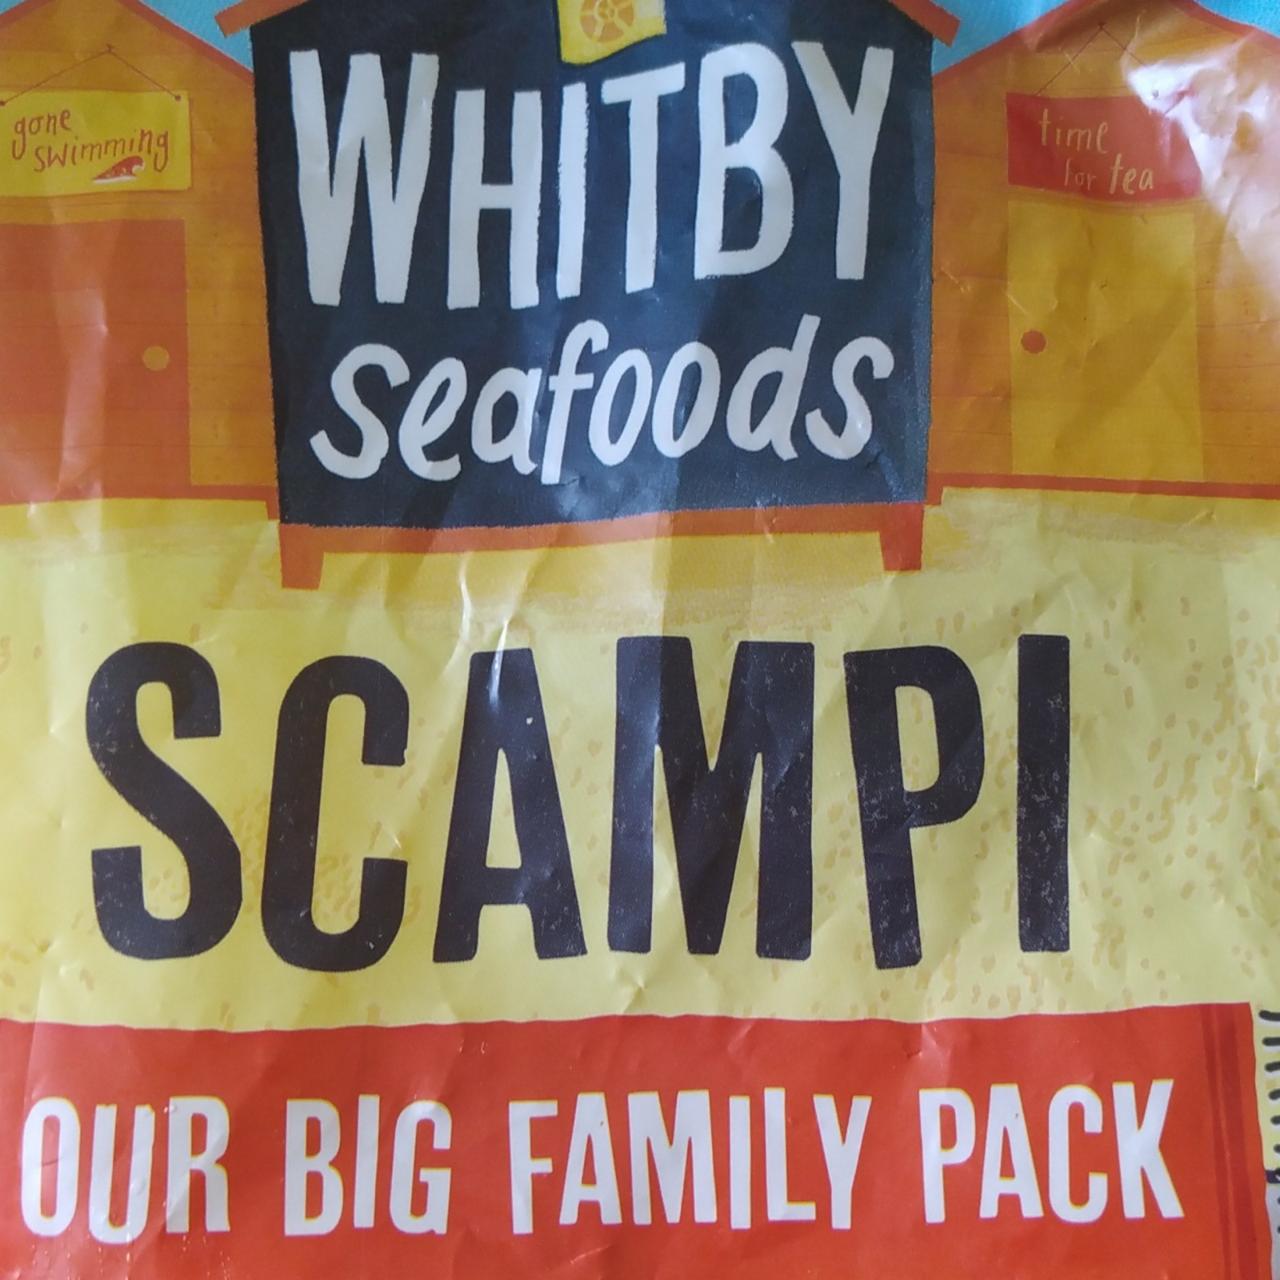 Fotografie - Scampi Whitby seafoods